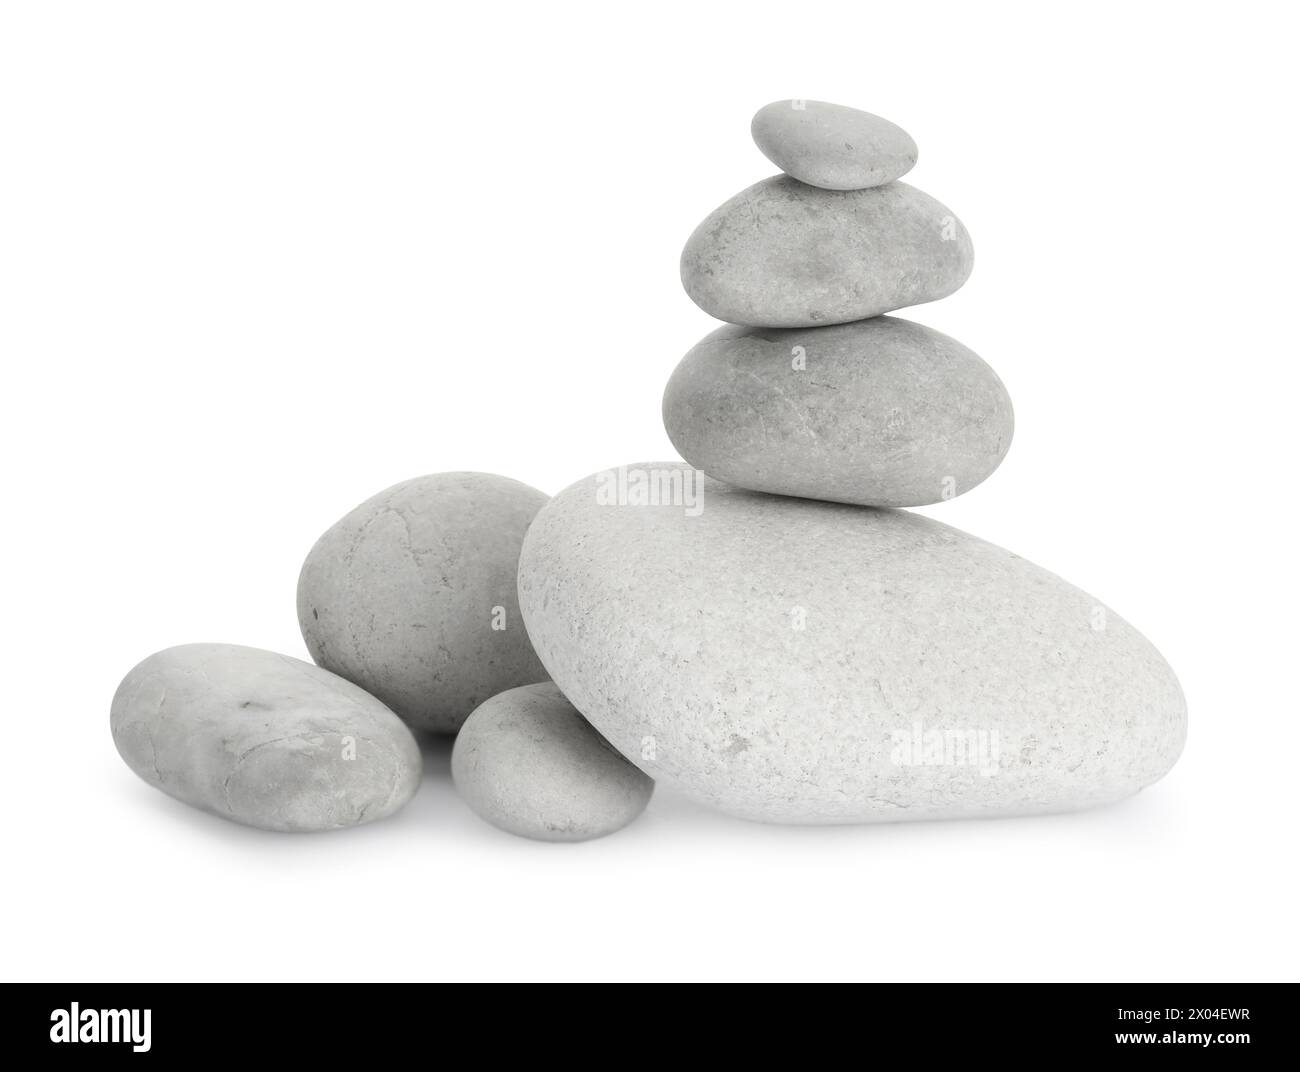 Group of different stones isolated on white Stock Photo